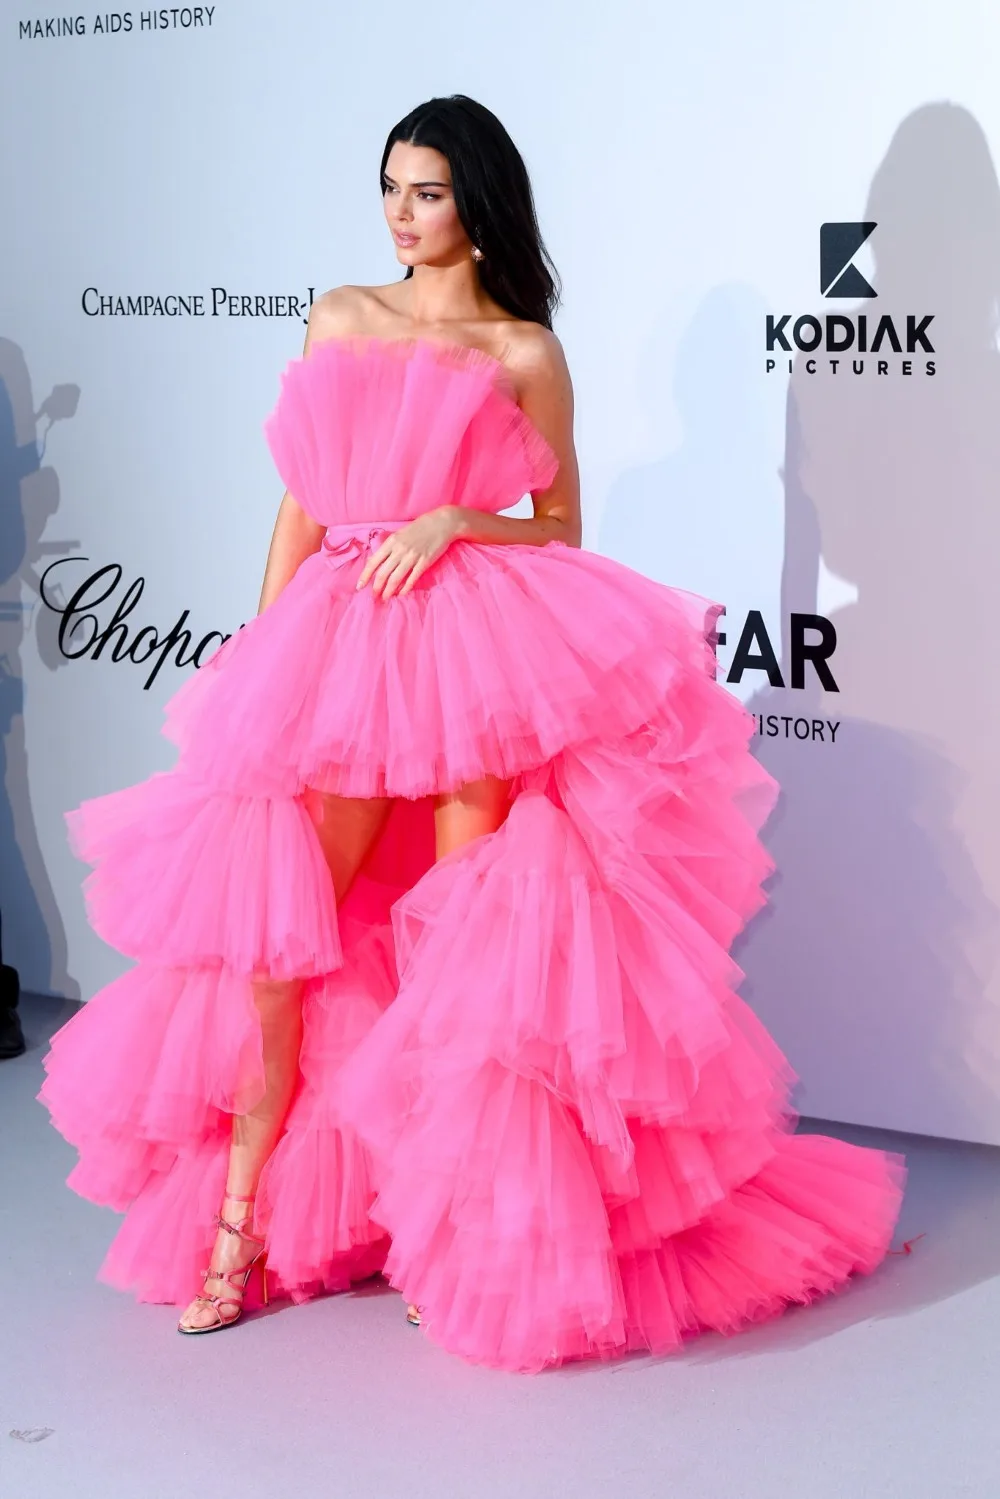 

Fuchsia Prom Dresses High Low Strapless Tiered Pleat Tulle Evening Celebrity Gowns 2022 Formal Party Dresses New